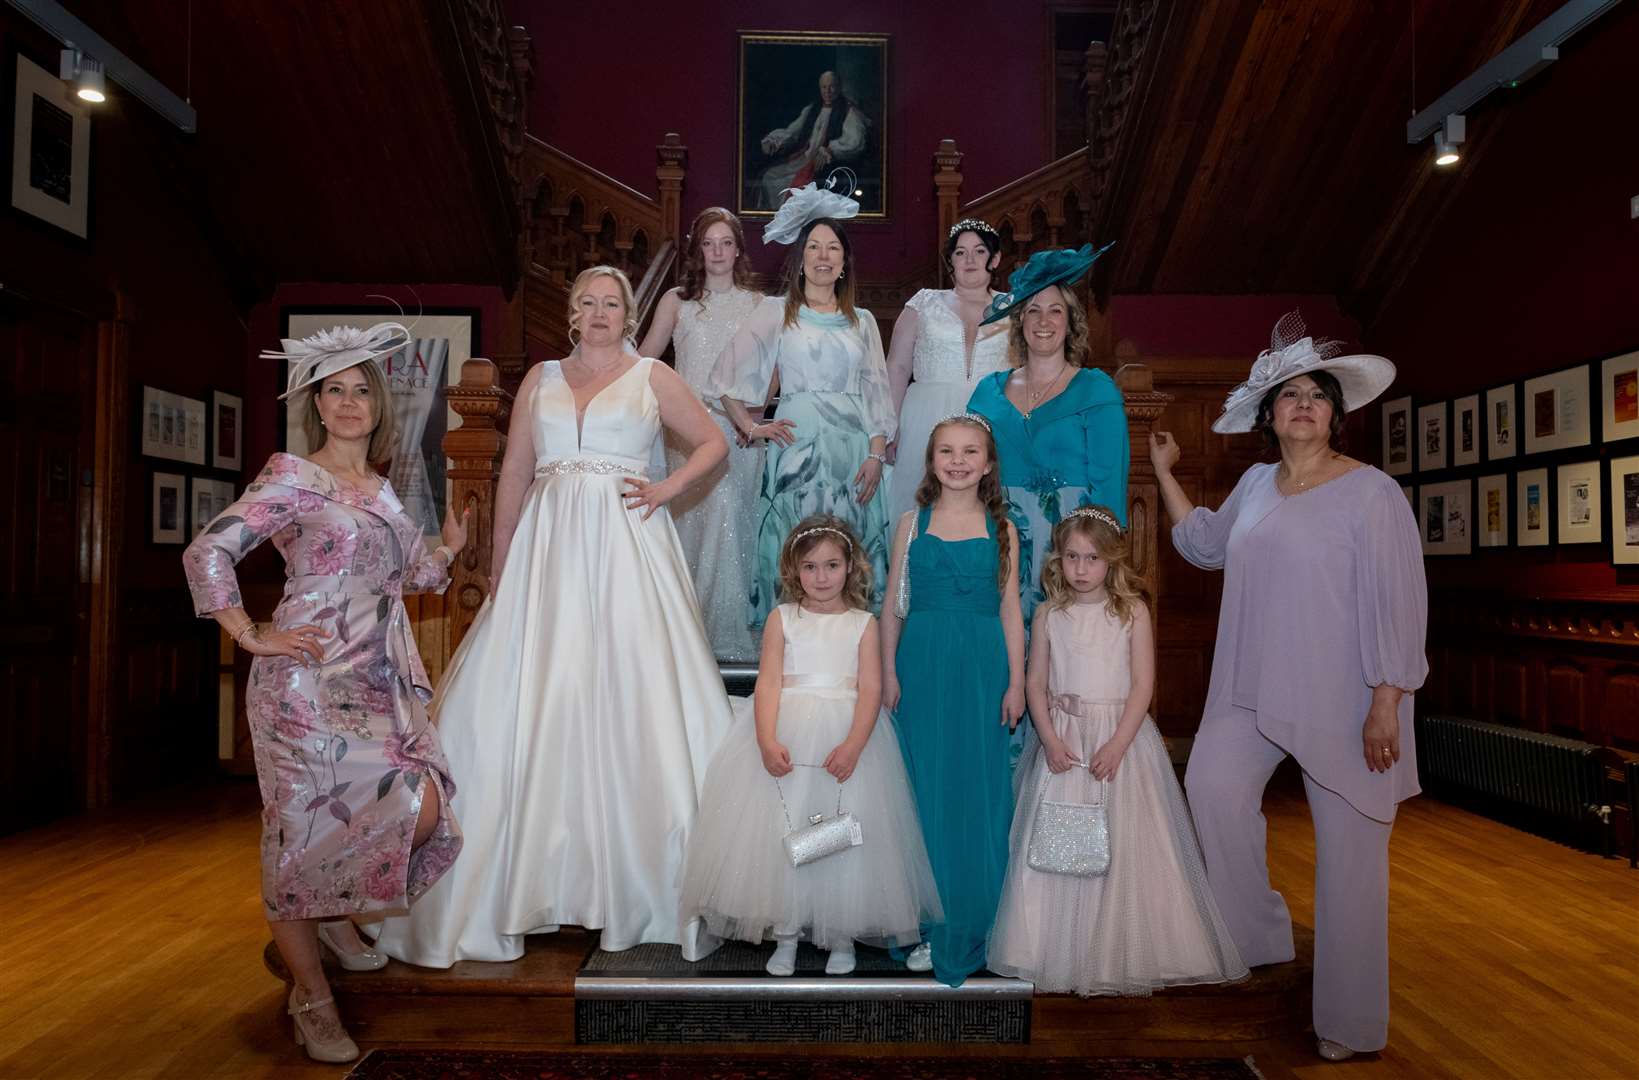 Models wore beautiful wedding gowns from Opalily Bridal, Turriff and gorgeous occasion wear from La-Di-Da Fashion, Inverness. Picture: Callum Mackay.